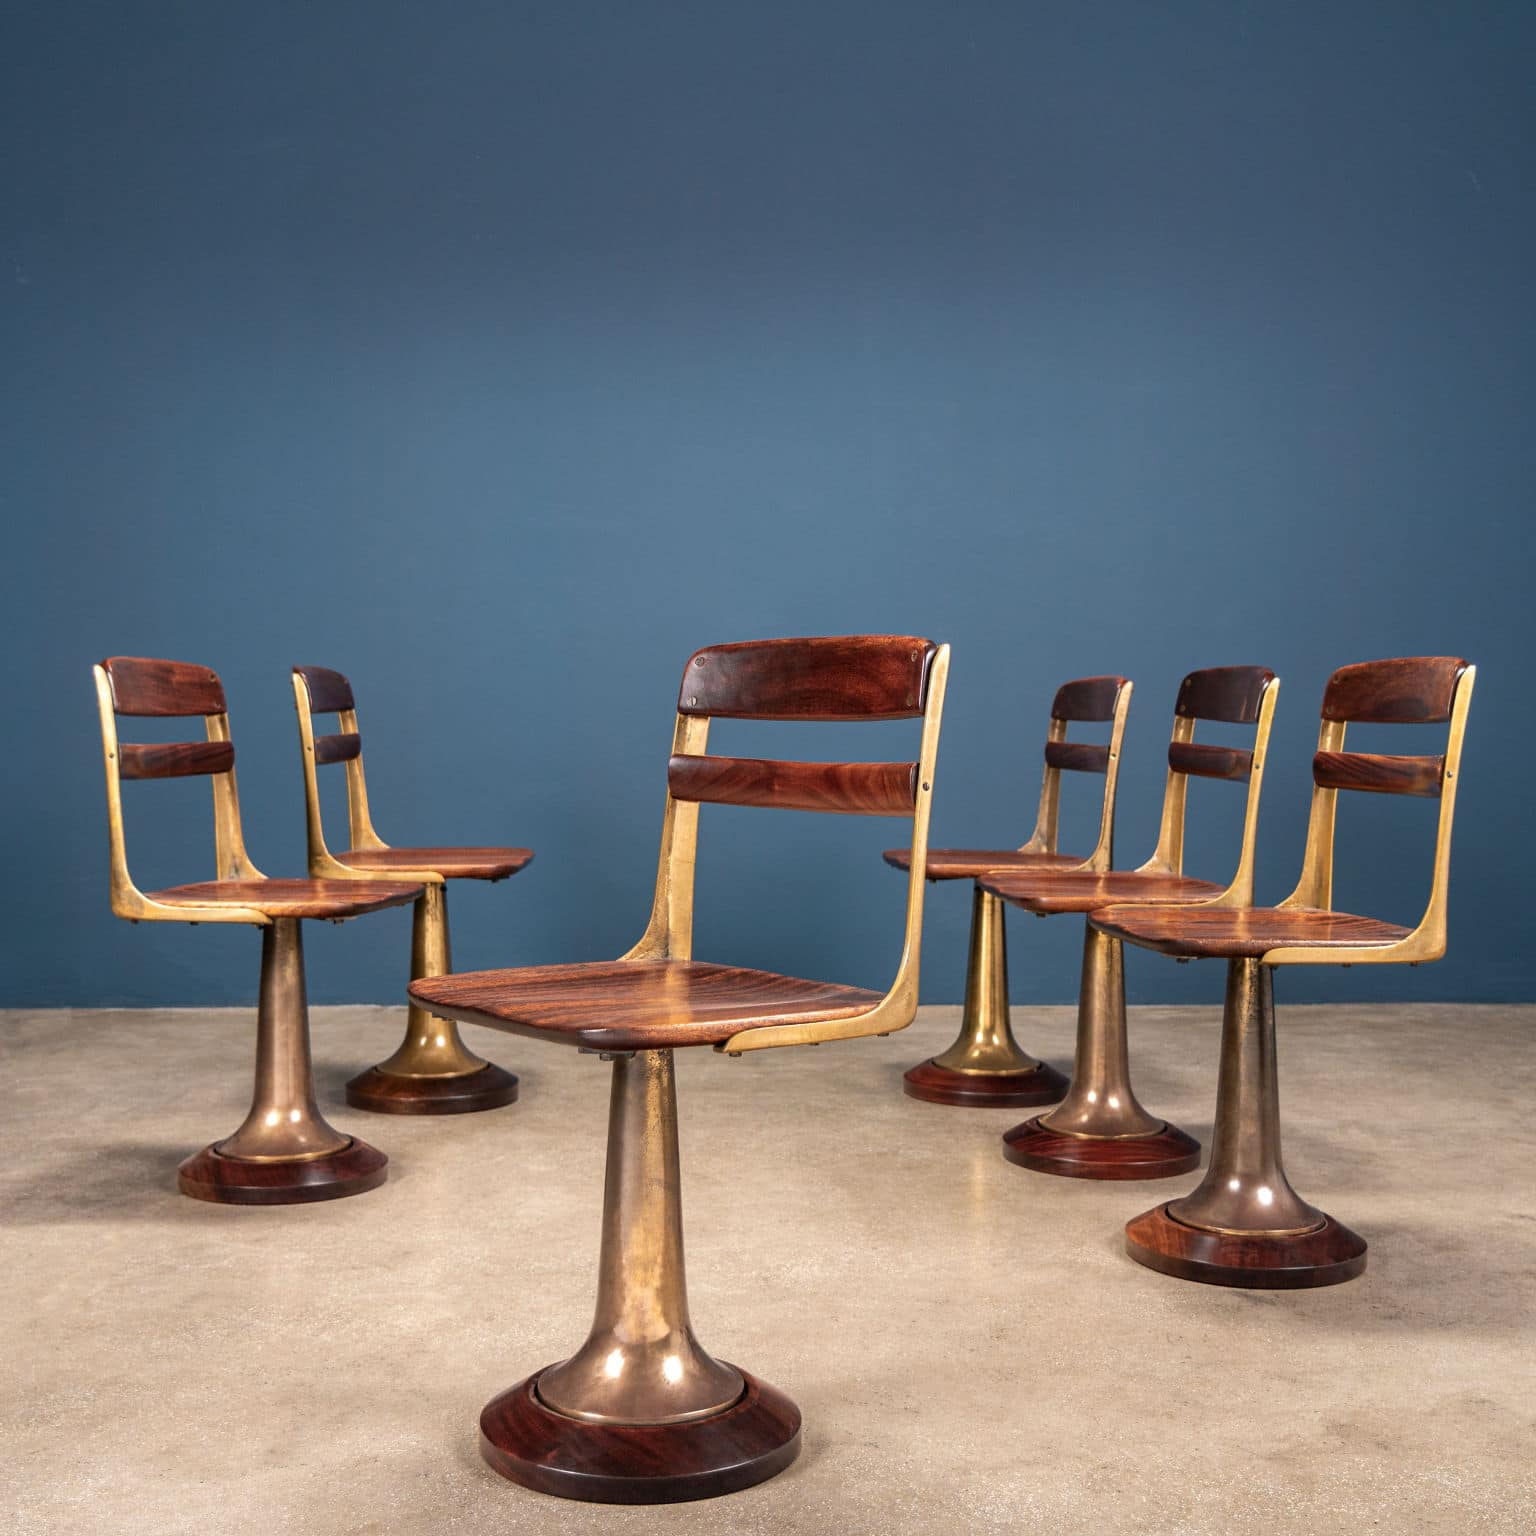 1950s chairs, Italian manufacture